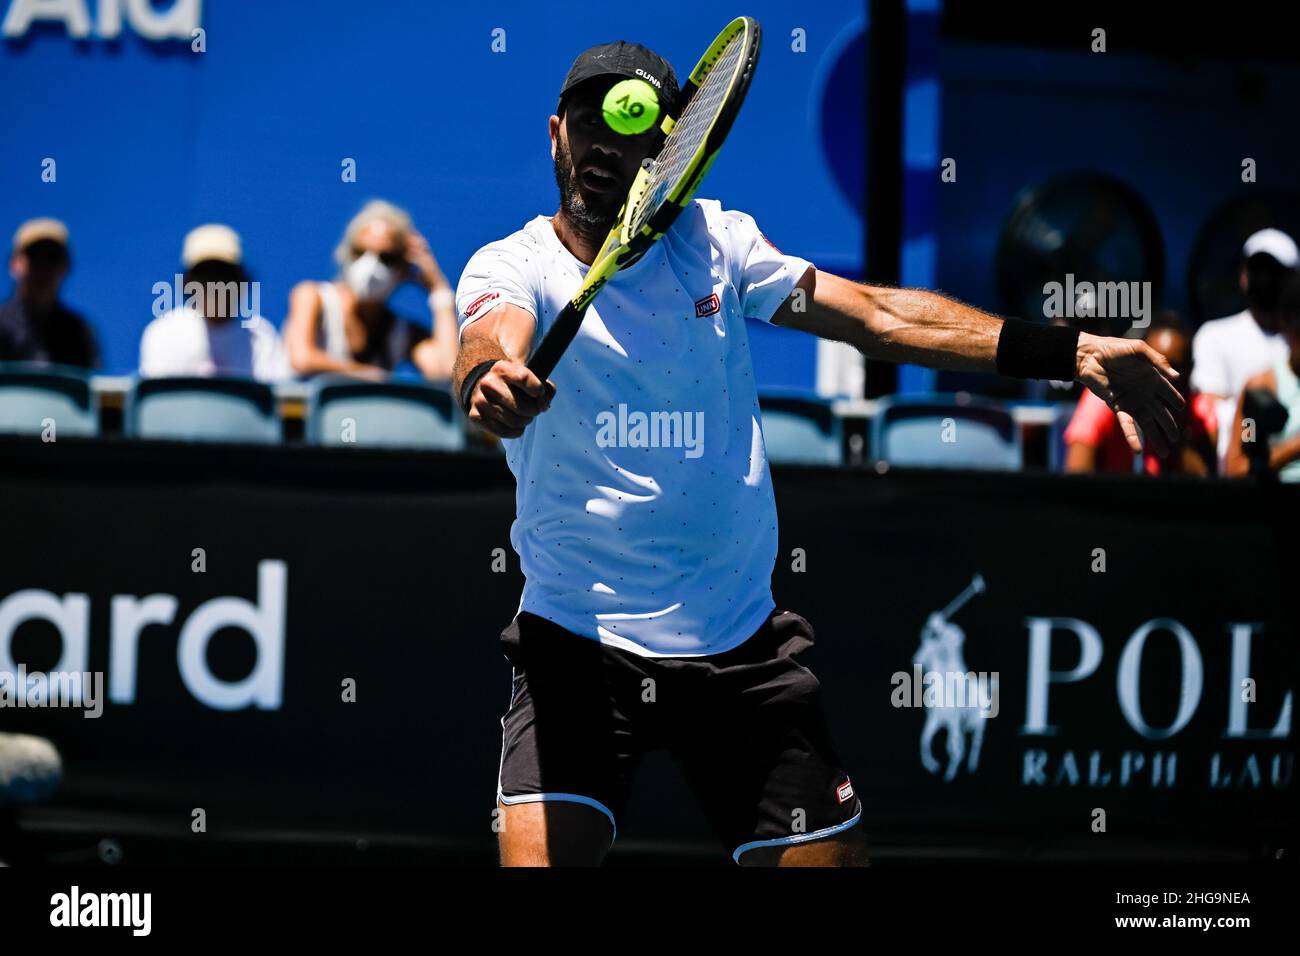 MELBOURNE, AUSTRALIA - JANUARY 19: Jean-Julien Rojer of the Netherlands plays a volley in his Men's Doubles First Round match with Marcelo Arevalo of El Salvador against Botic van de Zandschulp of the Netherlands and Robin Haase of the Netherlands during the Australian Open 2022 at Melbourne Park on January 19, 2022 in Melbourne, Australia (Photo by Andy Astfalck/Orange Pictures) Credit: Orange Pics BV/Alamy Live News Stock Photo